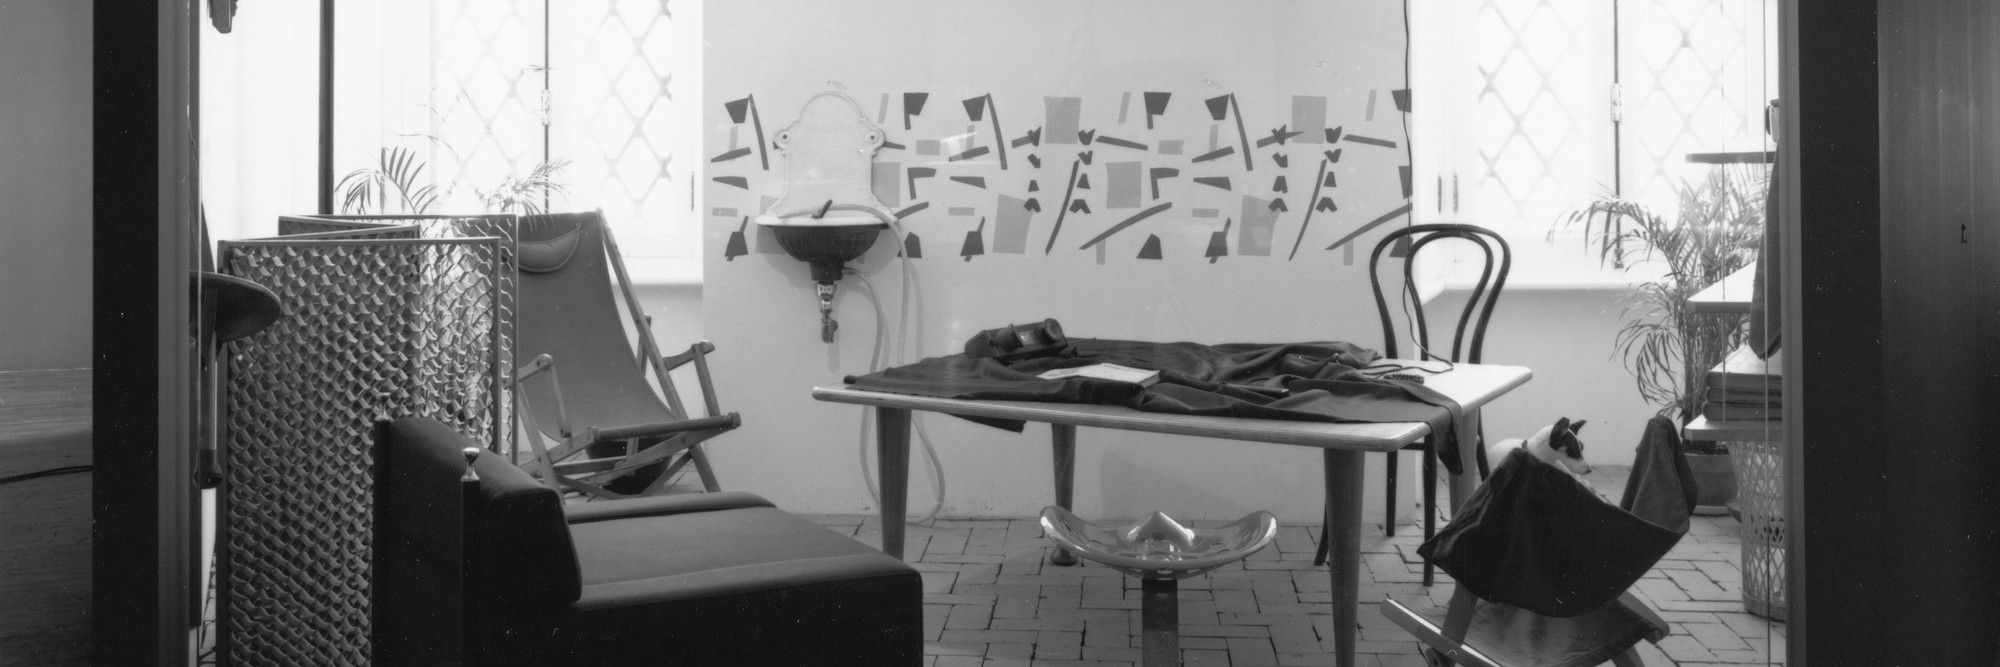 Installation view of Achille Castiglioni: Design! at The Museum of Modern Art, New York. Photo: Thomas Griesel